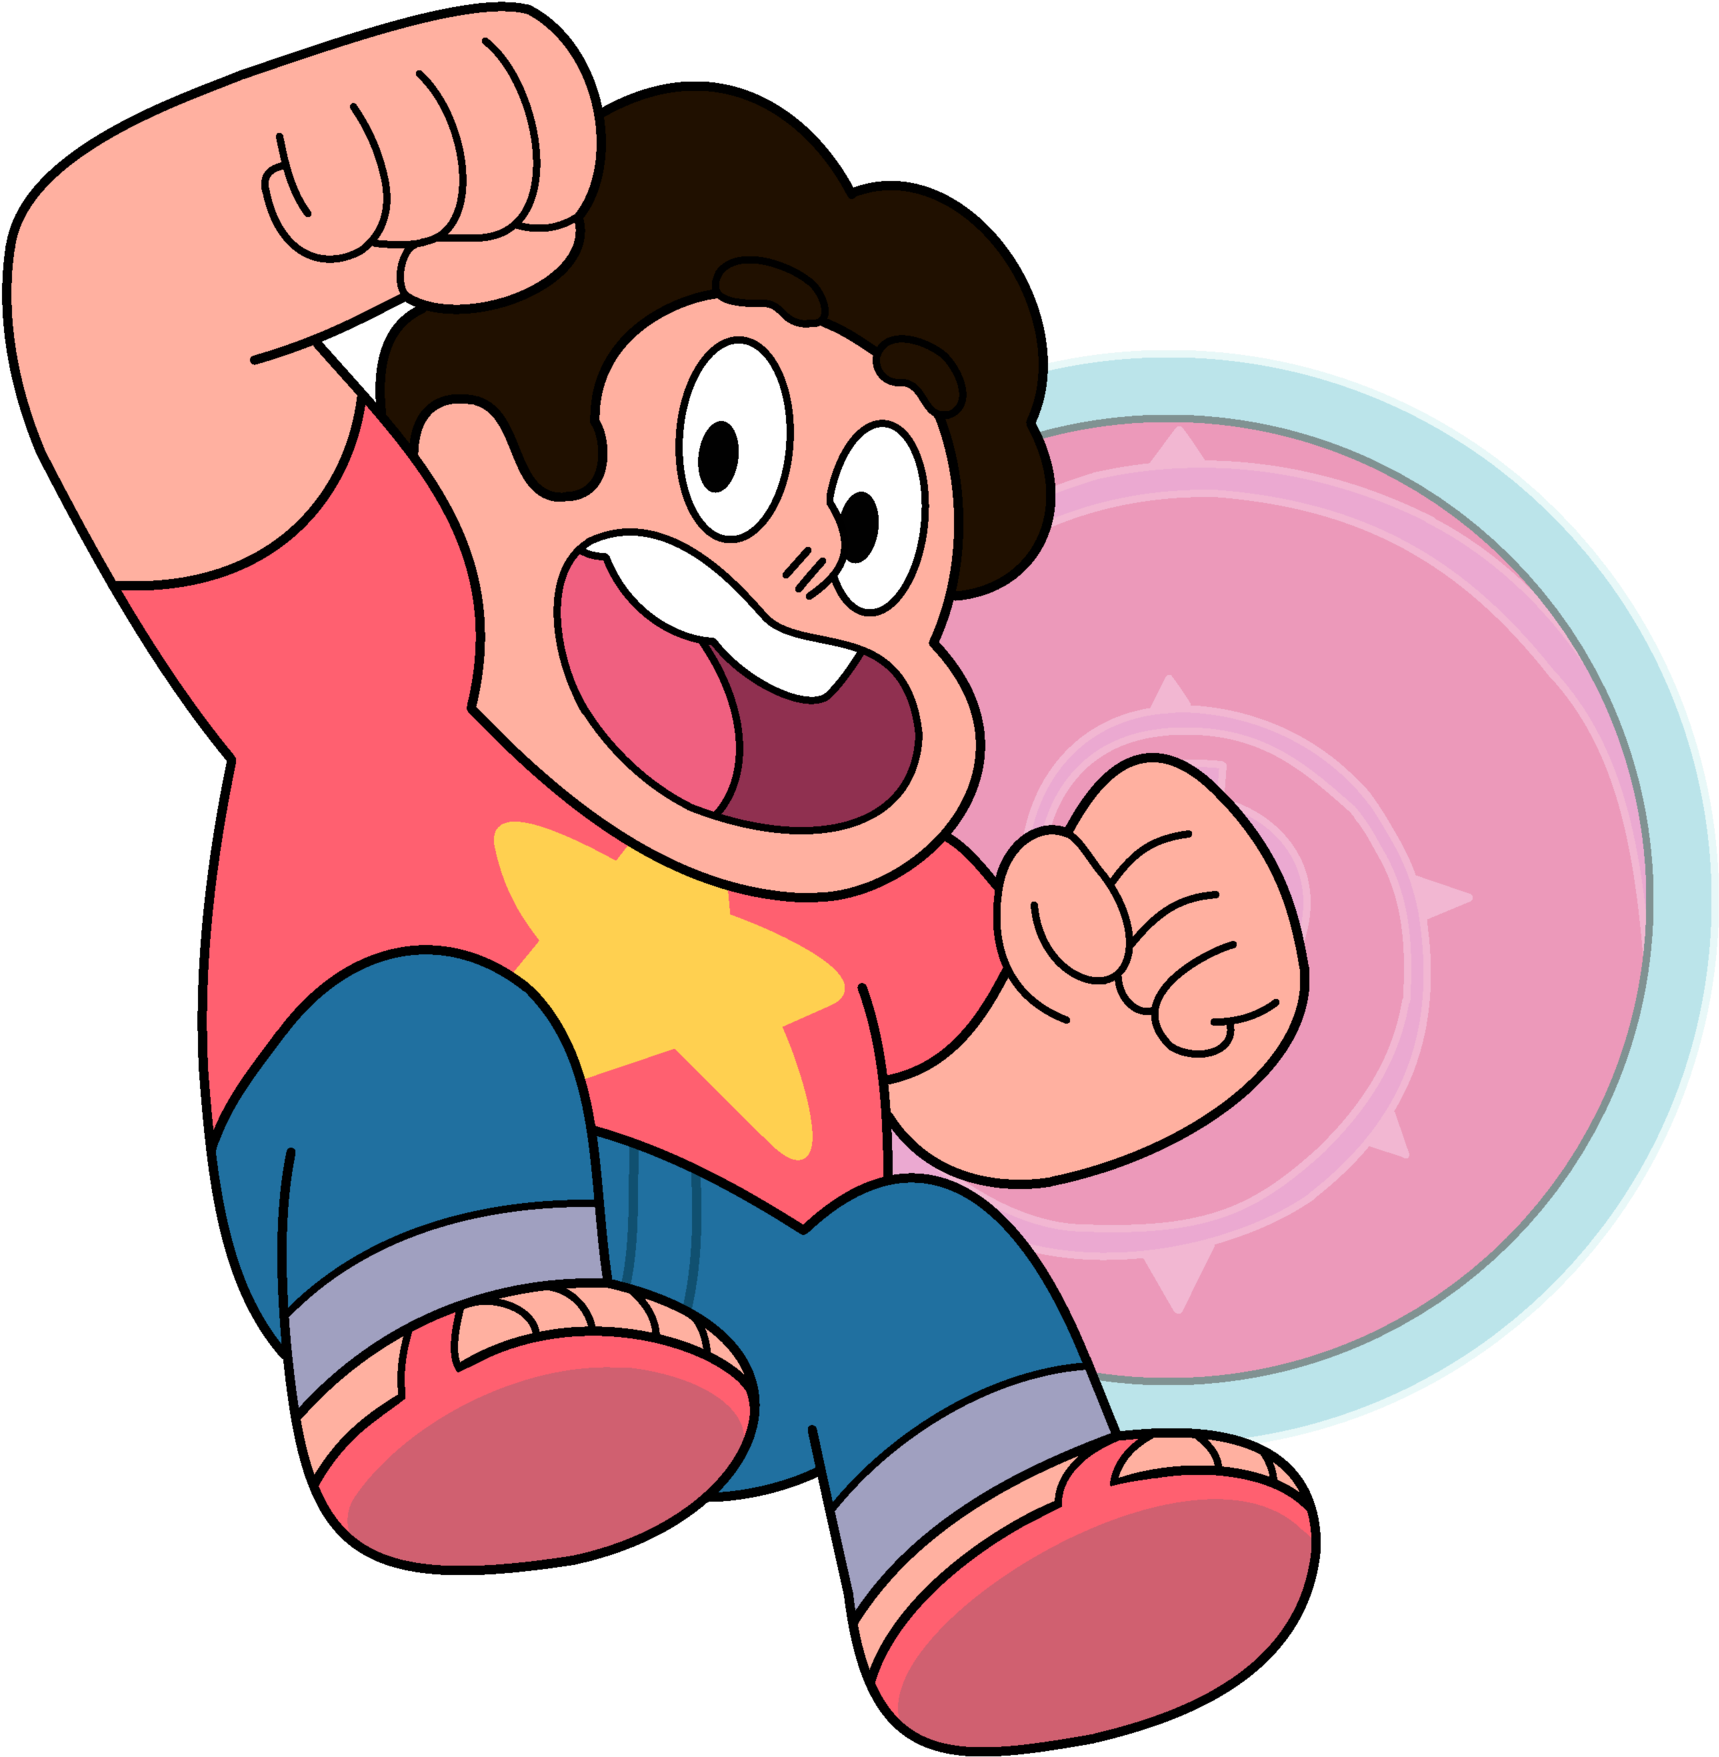 Cartoon image of Steven Universe with a shield